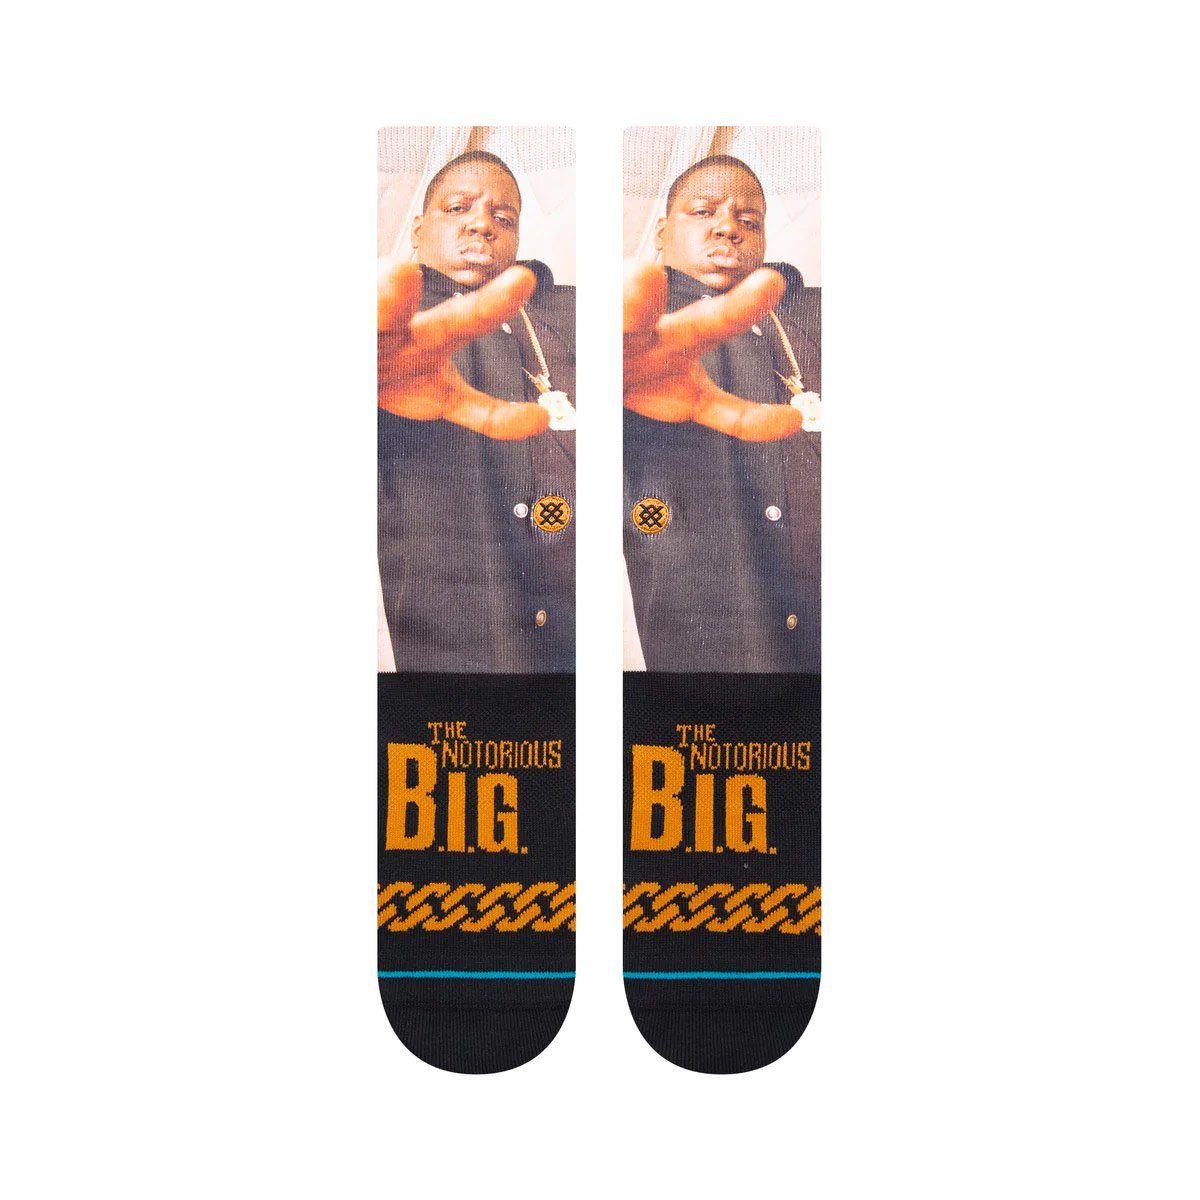 (1 Notorious B.I.G. x Freizeitsocken Paar) black The Stance Stance The Of King NY -